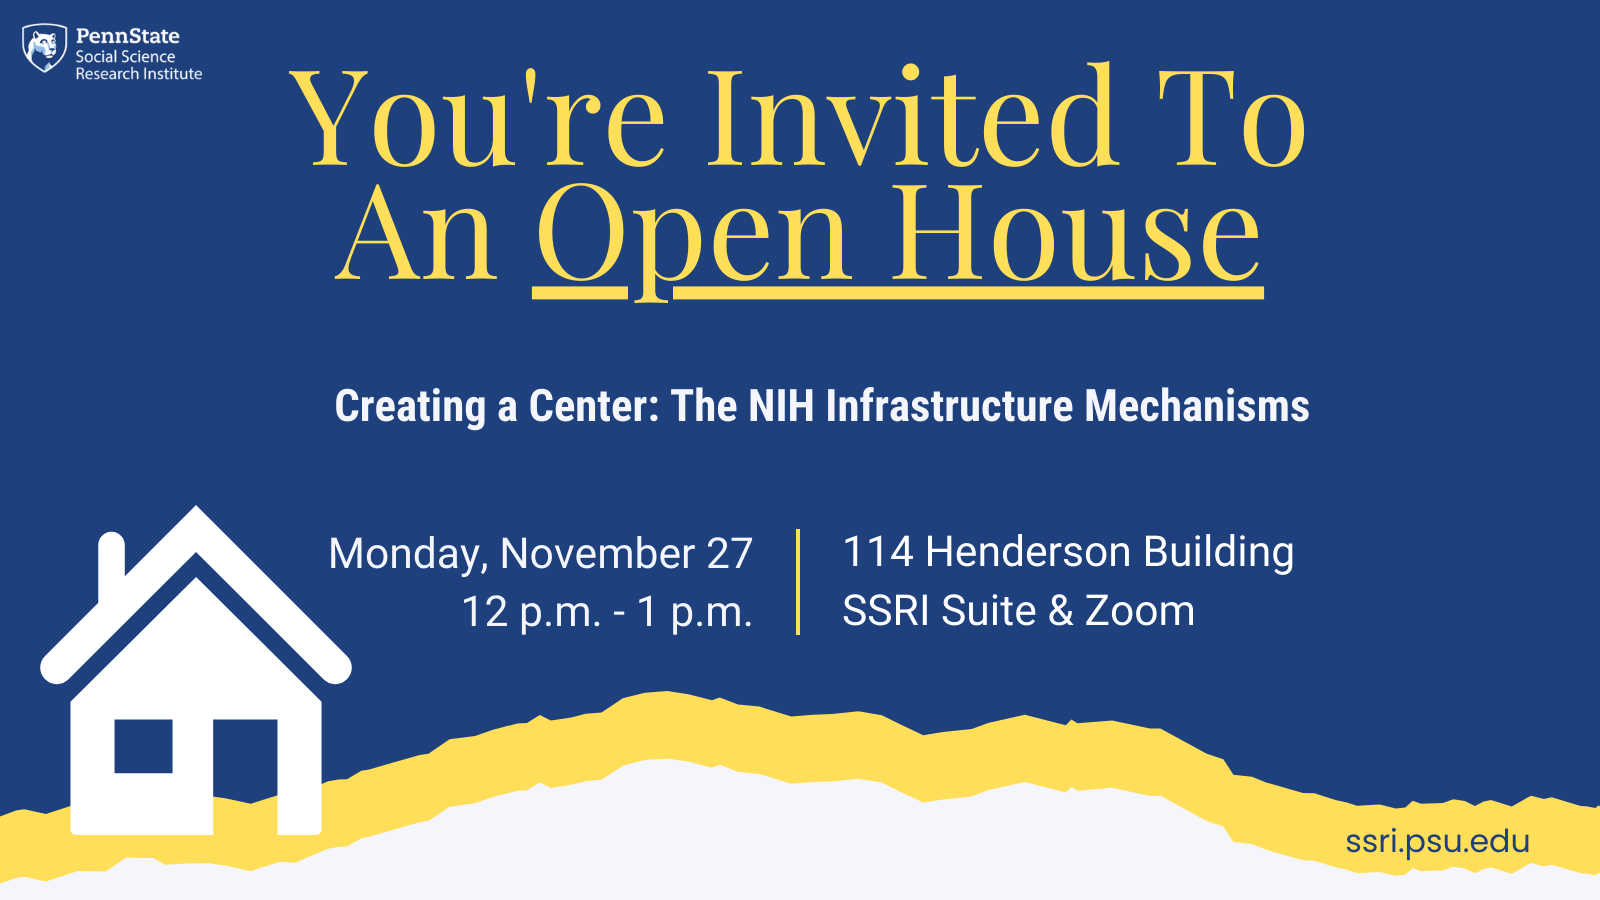 Dark blue graphic with white house at the bottom that says "you're invited to an open house" for the "creating a center: the NIH infrastructure mechanisms" on Monday, November 27 from 12pm to 1pm in 114 Henderson Building, SSRI Suite and on Zoom.